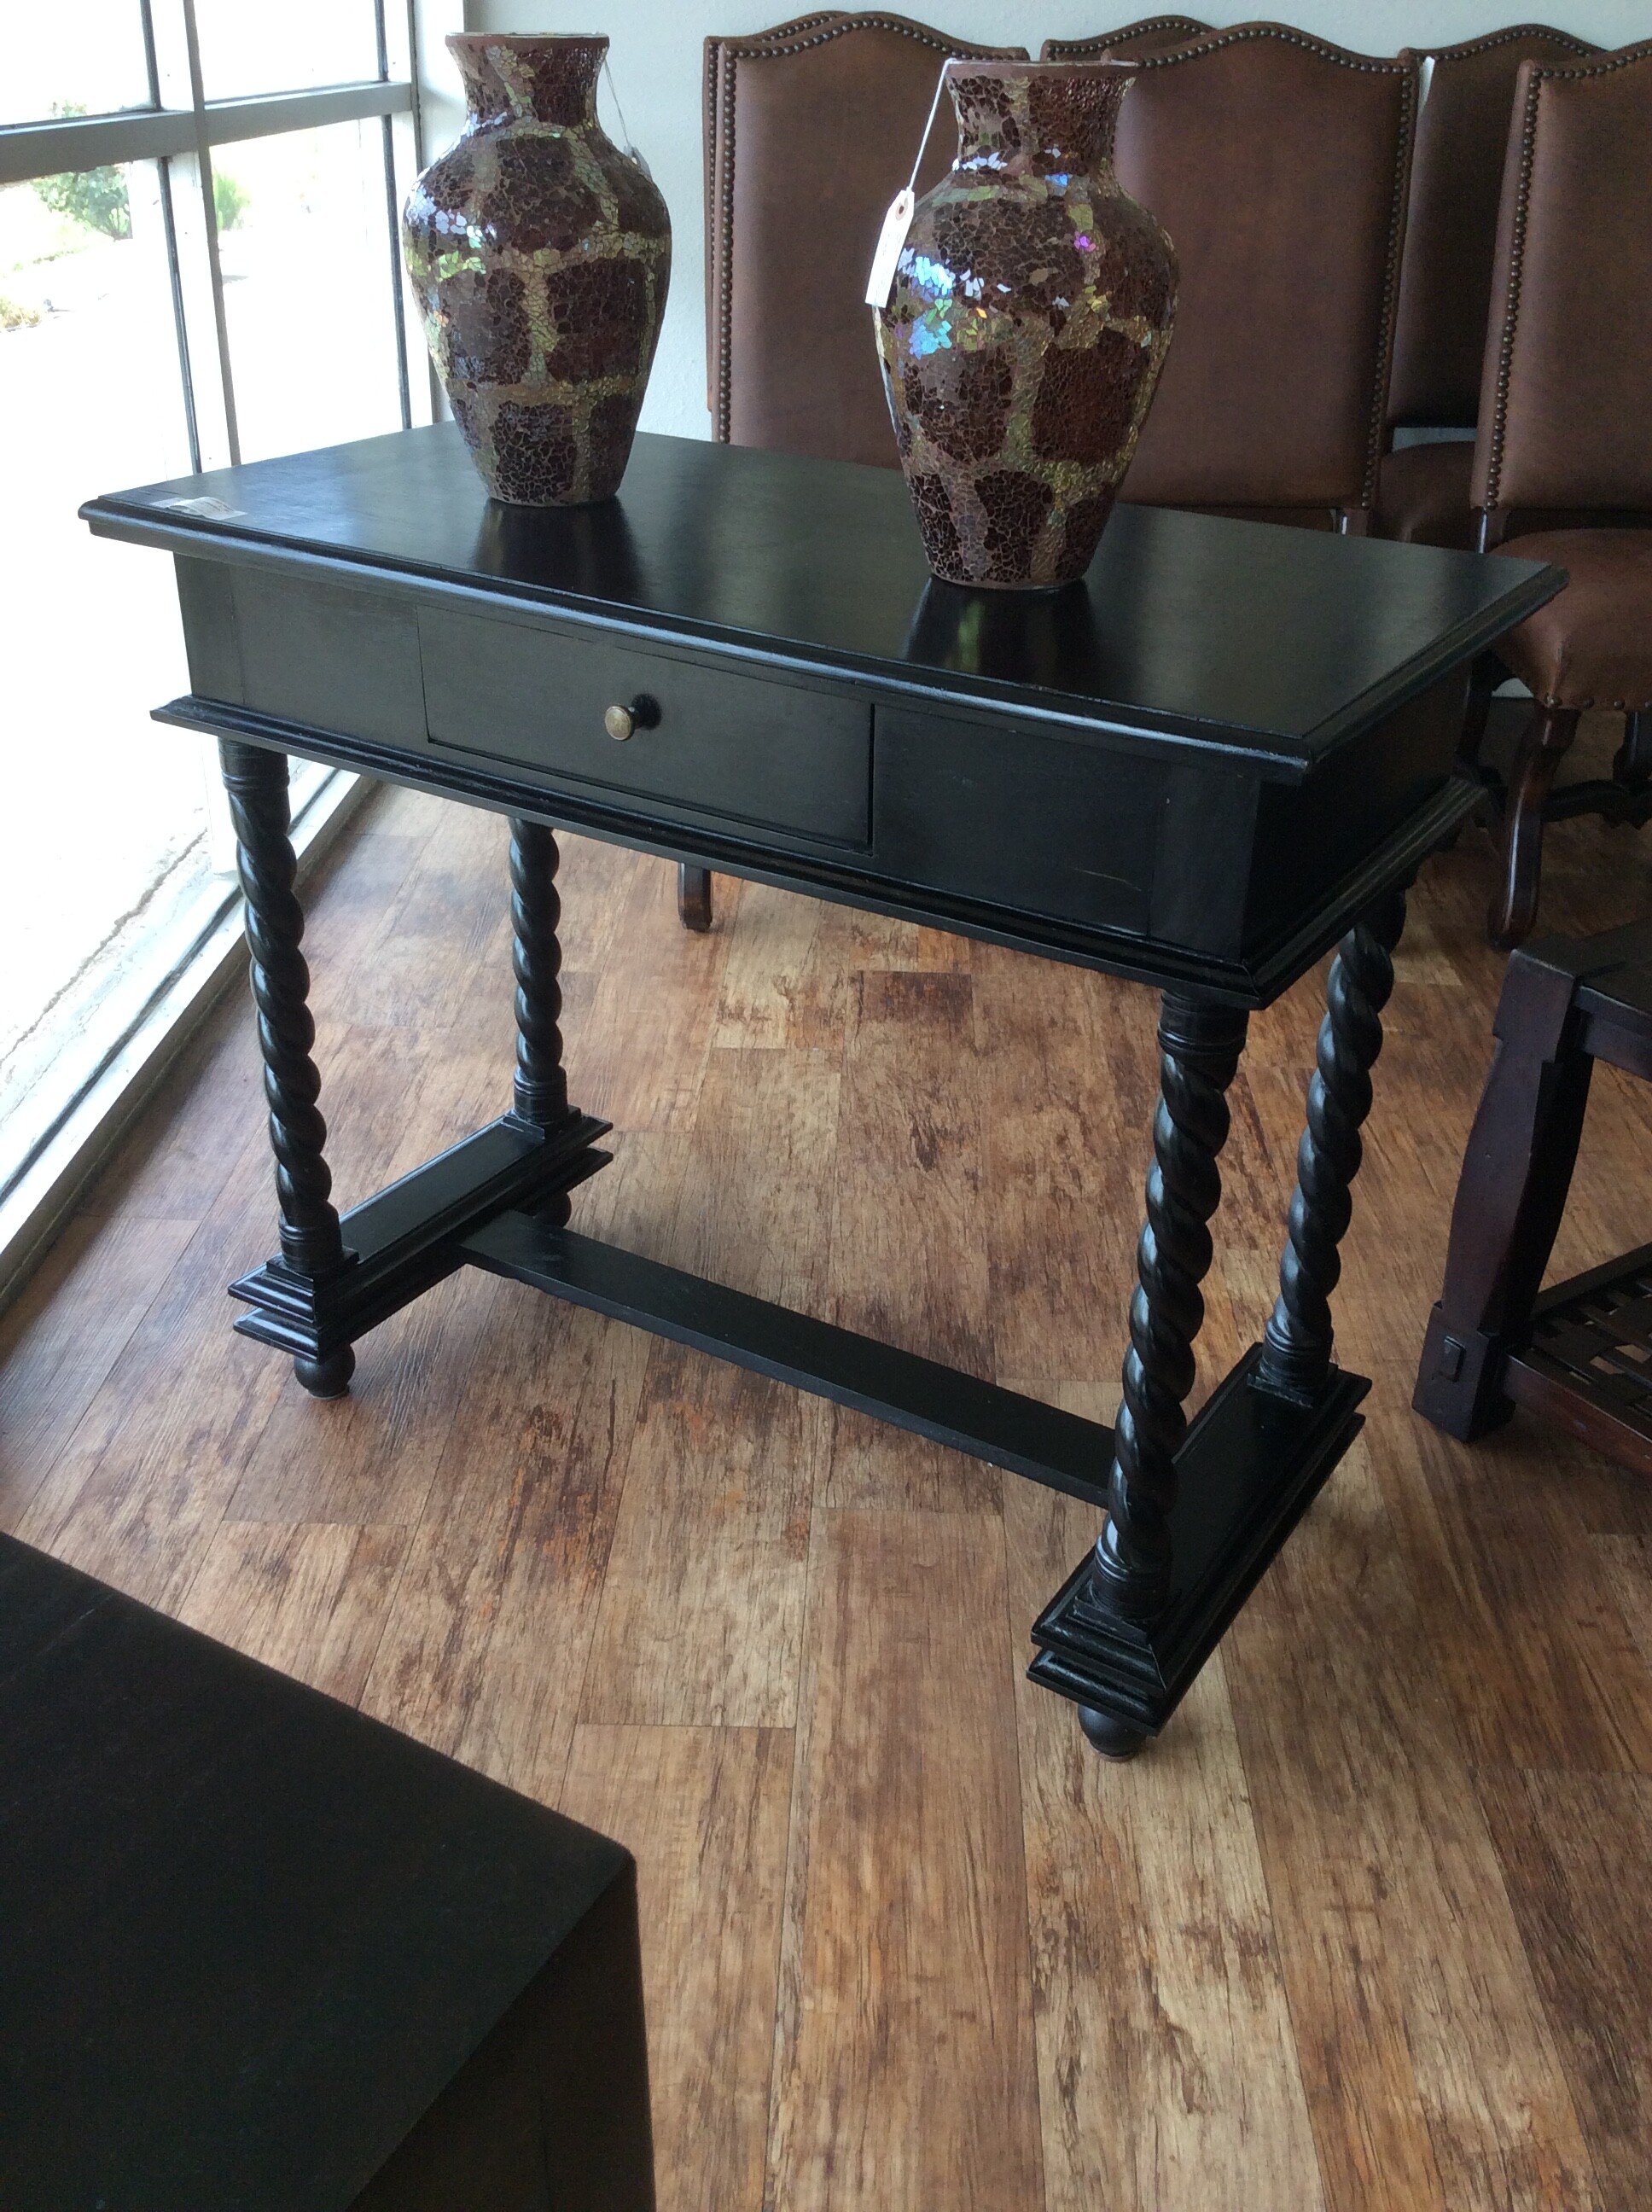 This is a beautiful black, Barley Twist Table with 1 drawer.